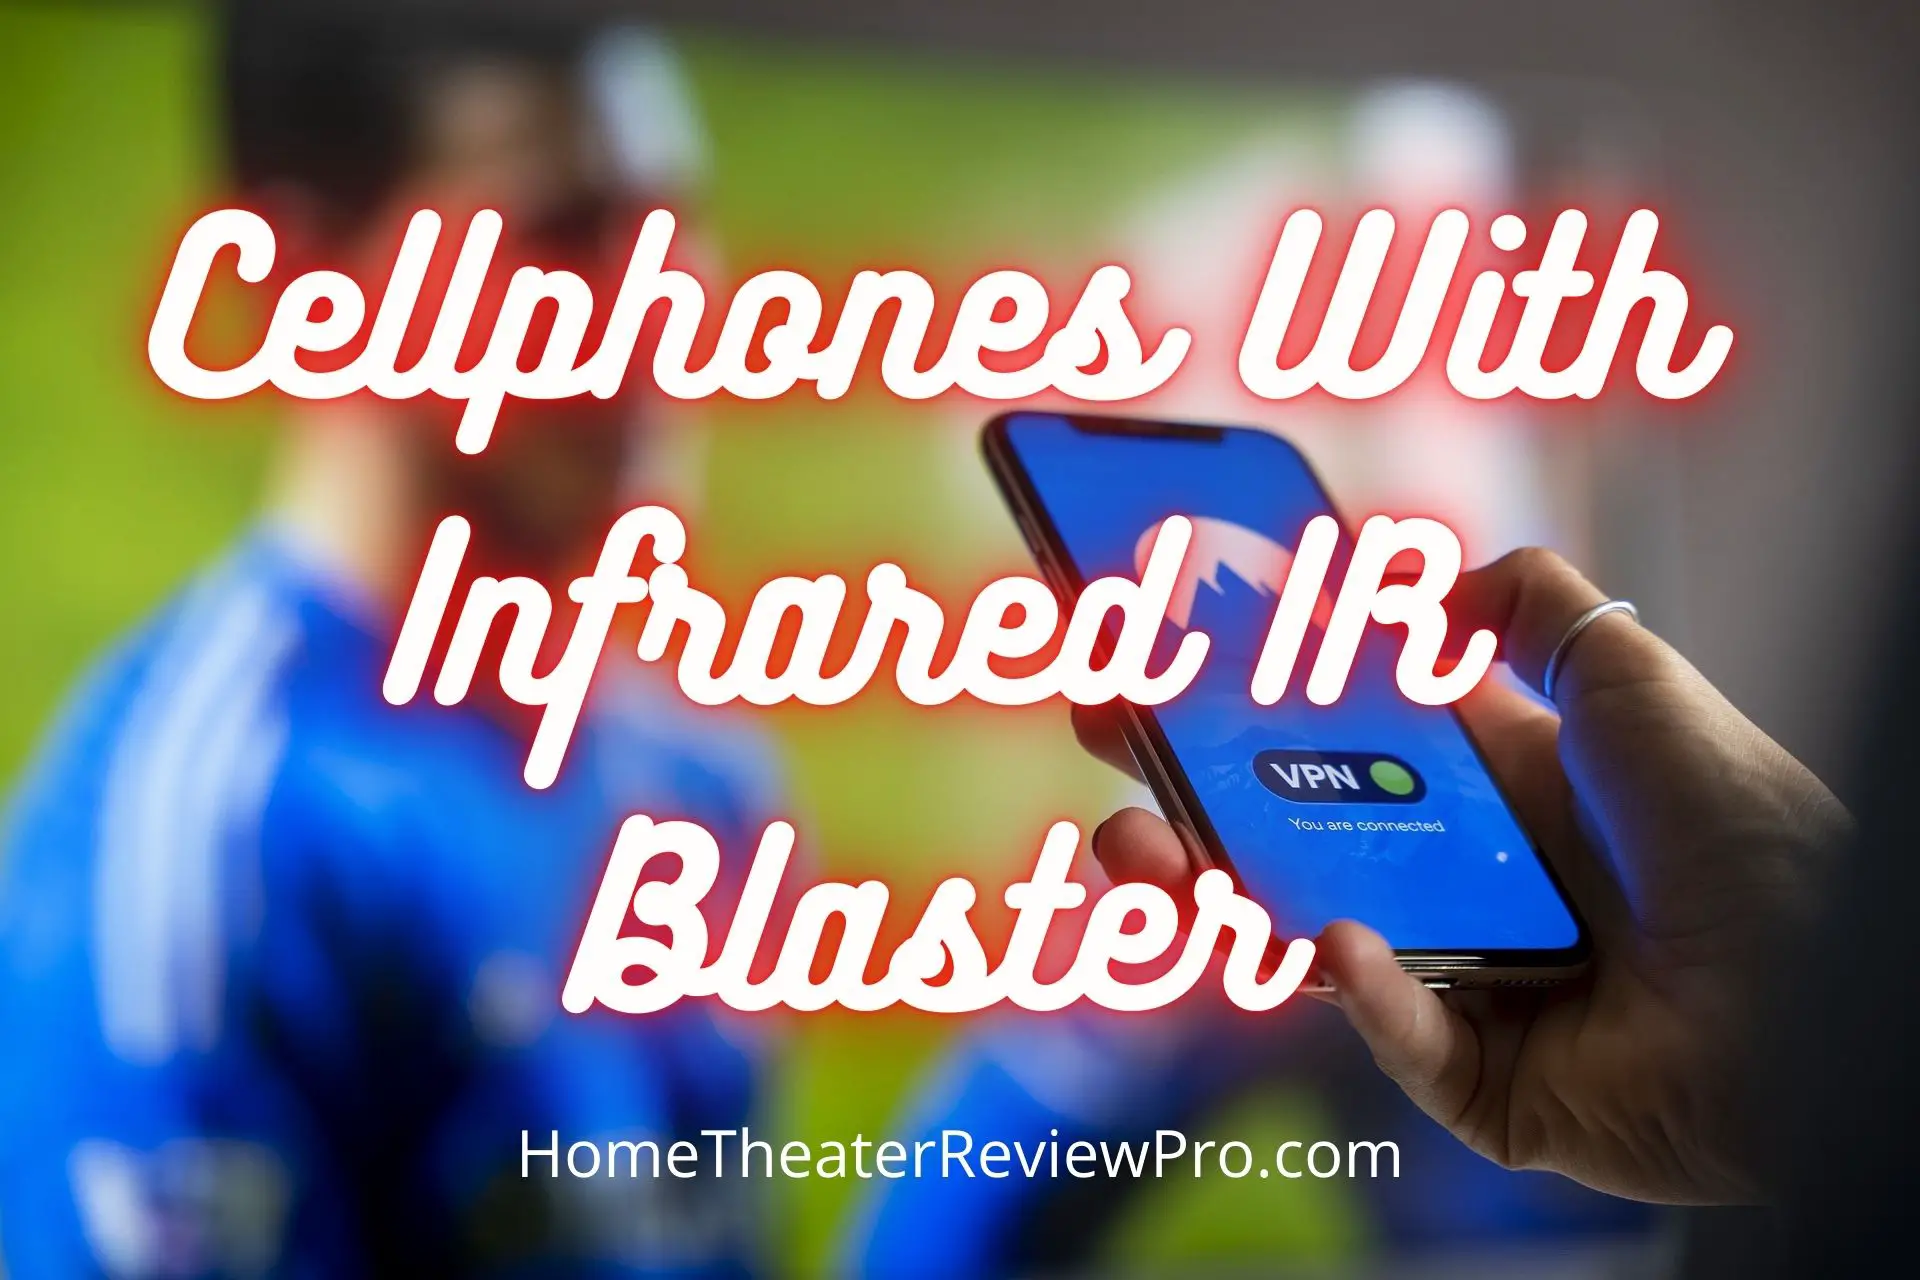 Cellphones With Infrared IR Blaster